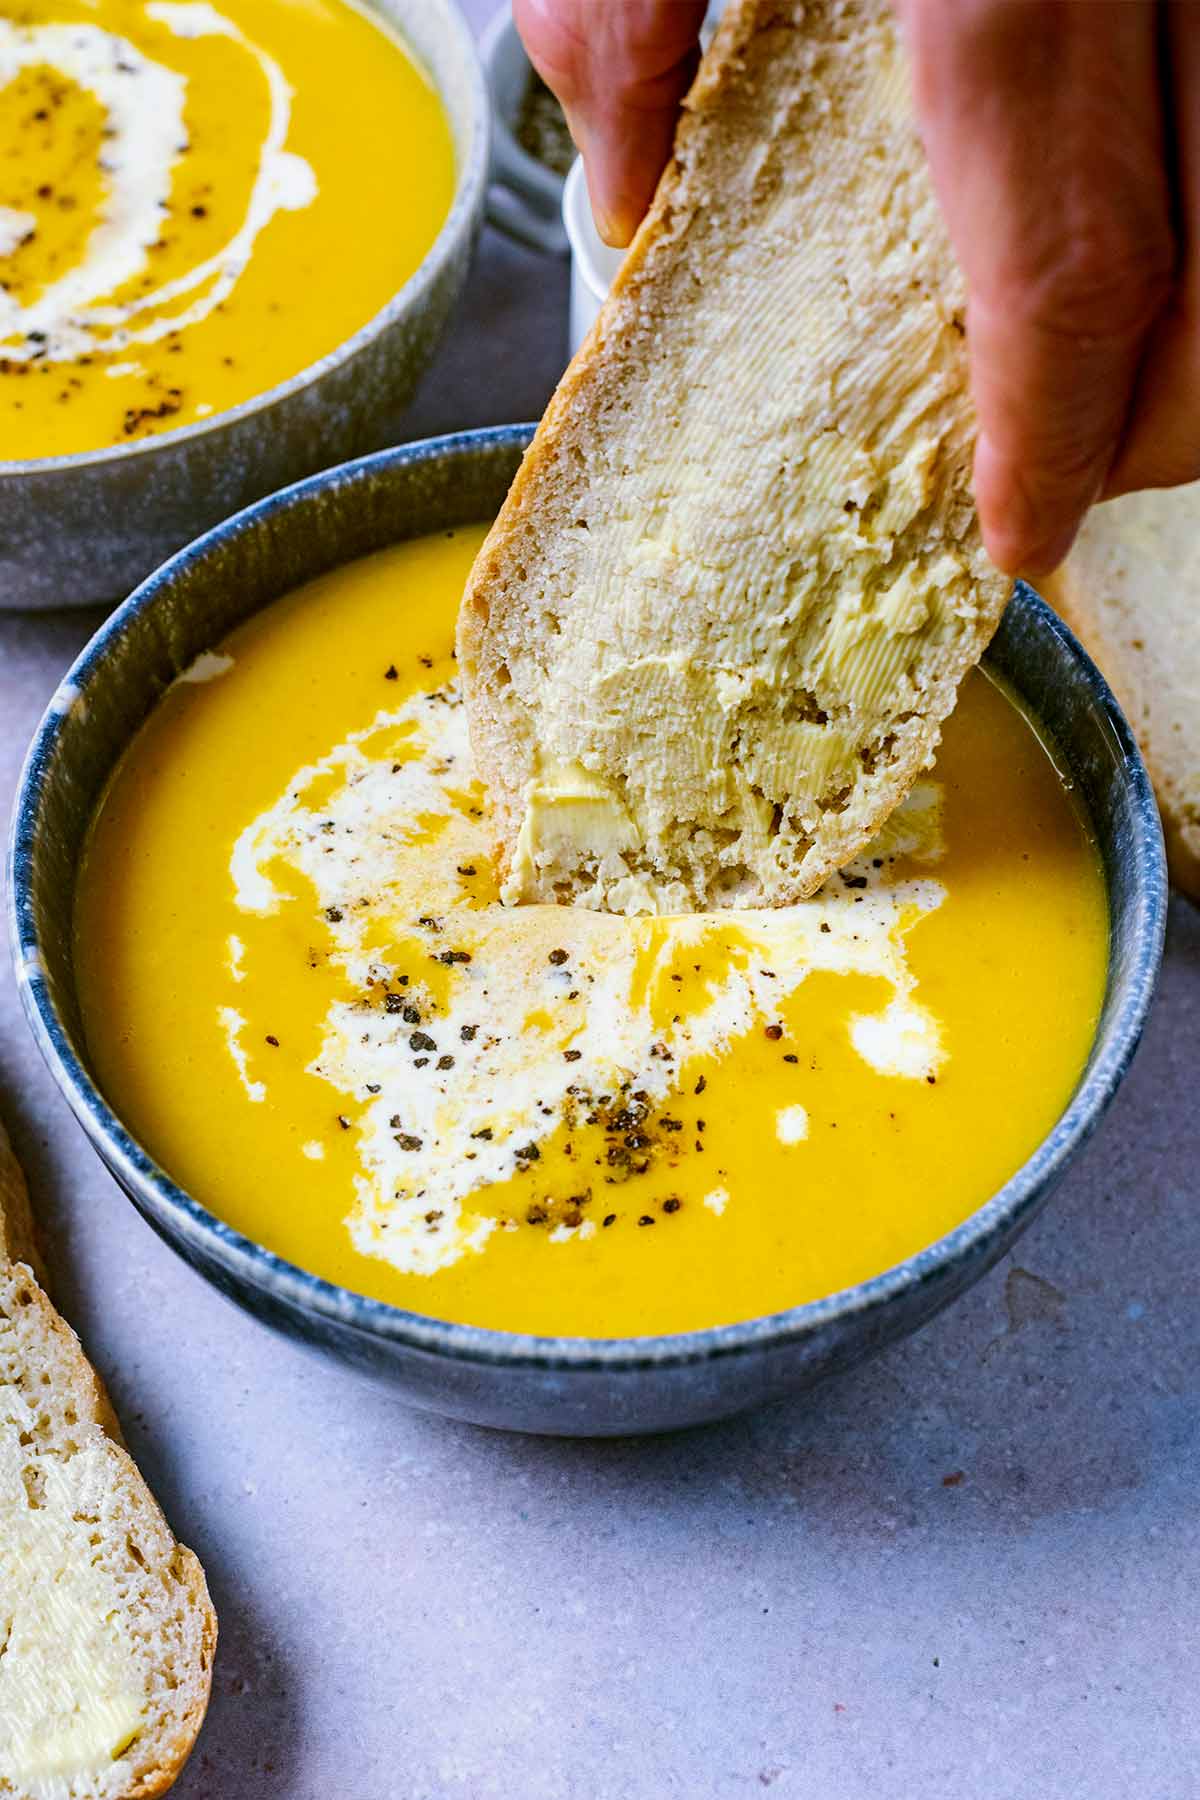 A slice of buttered bread being dipped into a bowl of soup.